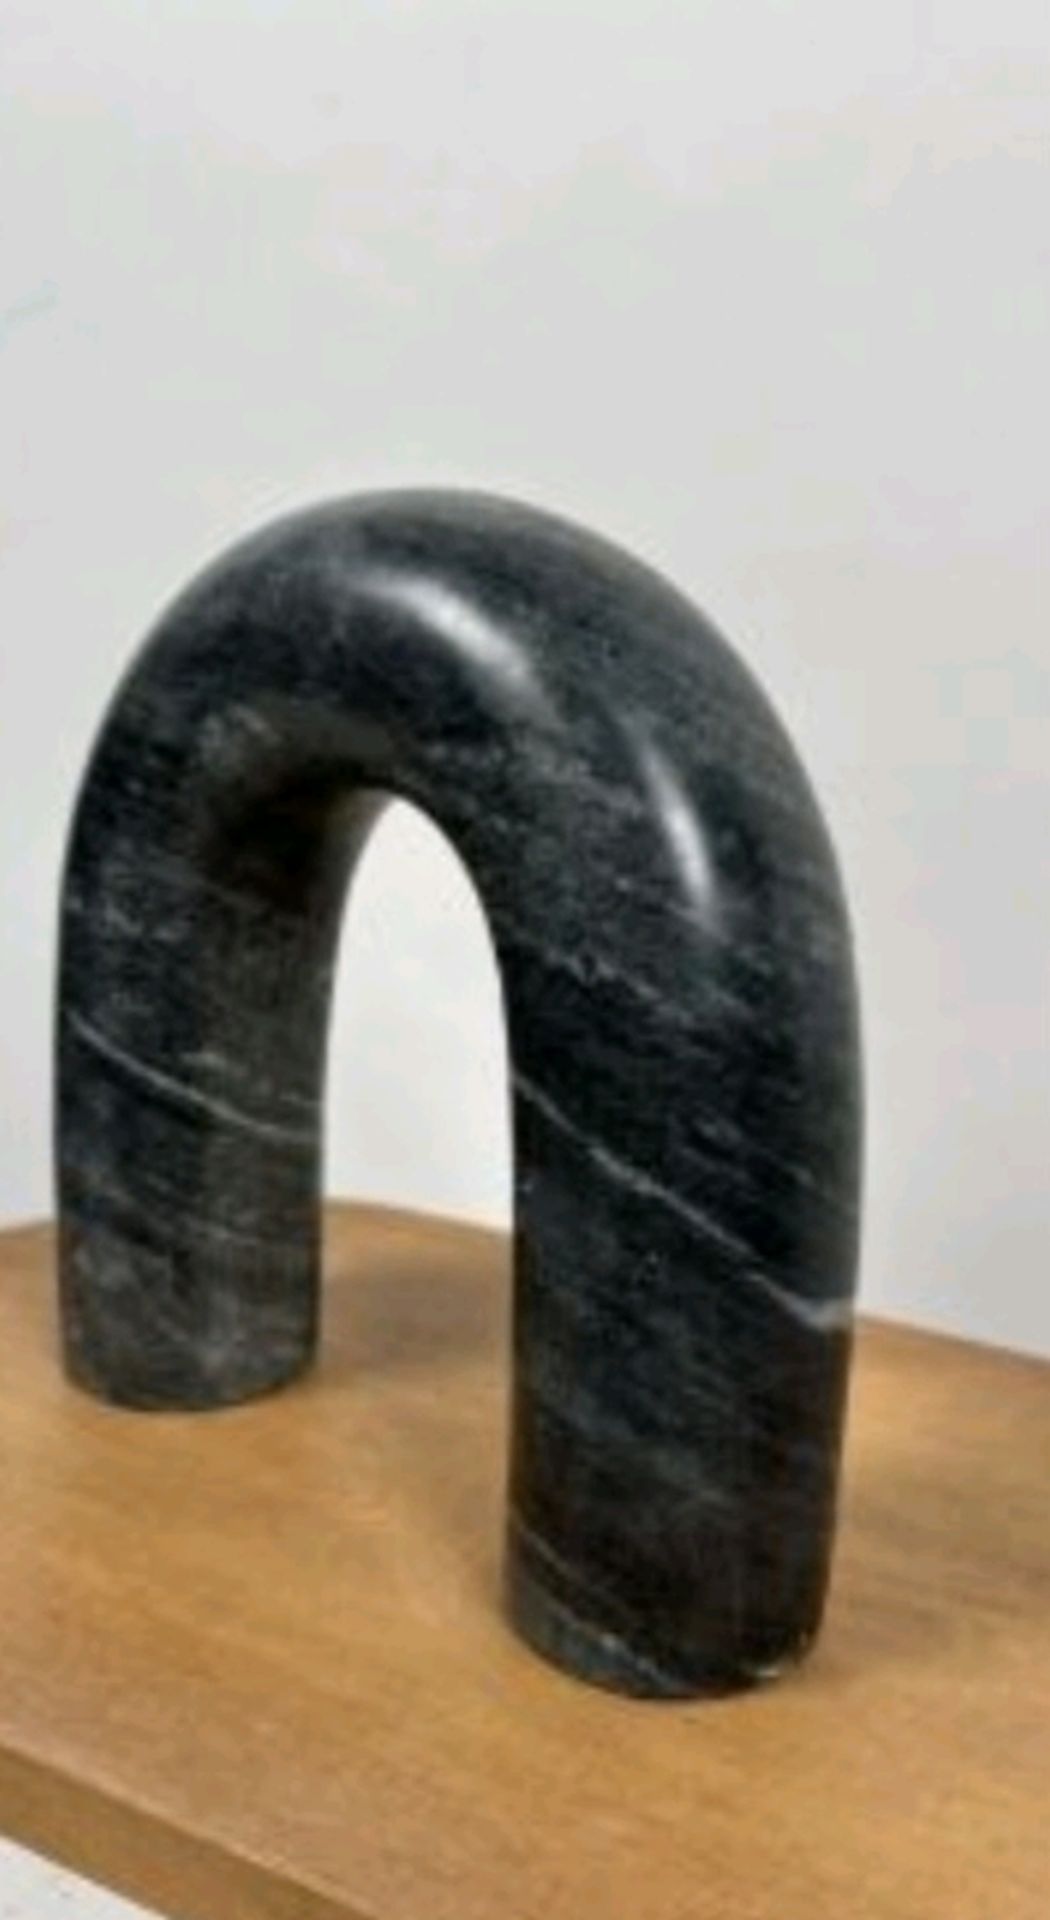 Ultra Arched Marble Object - Image 4 of 4